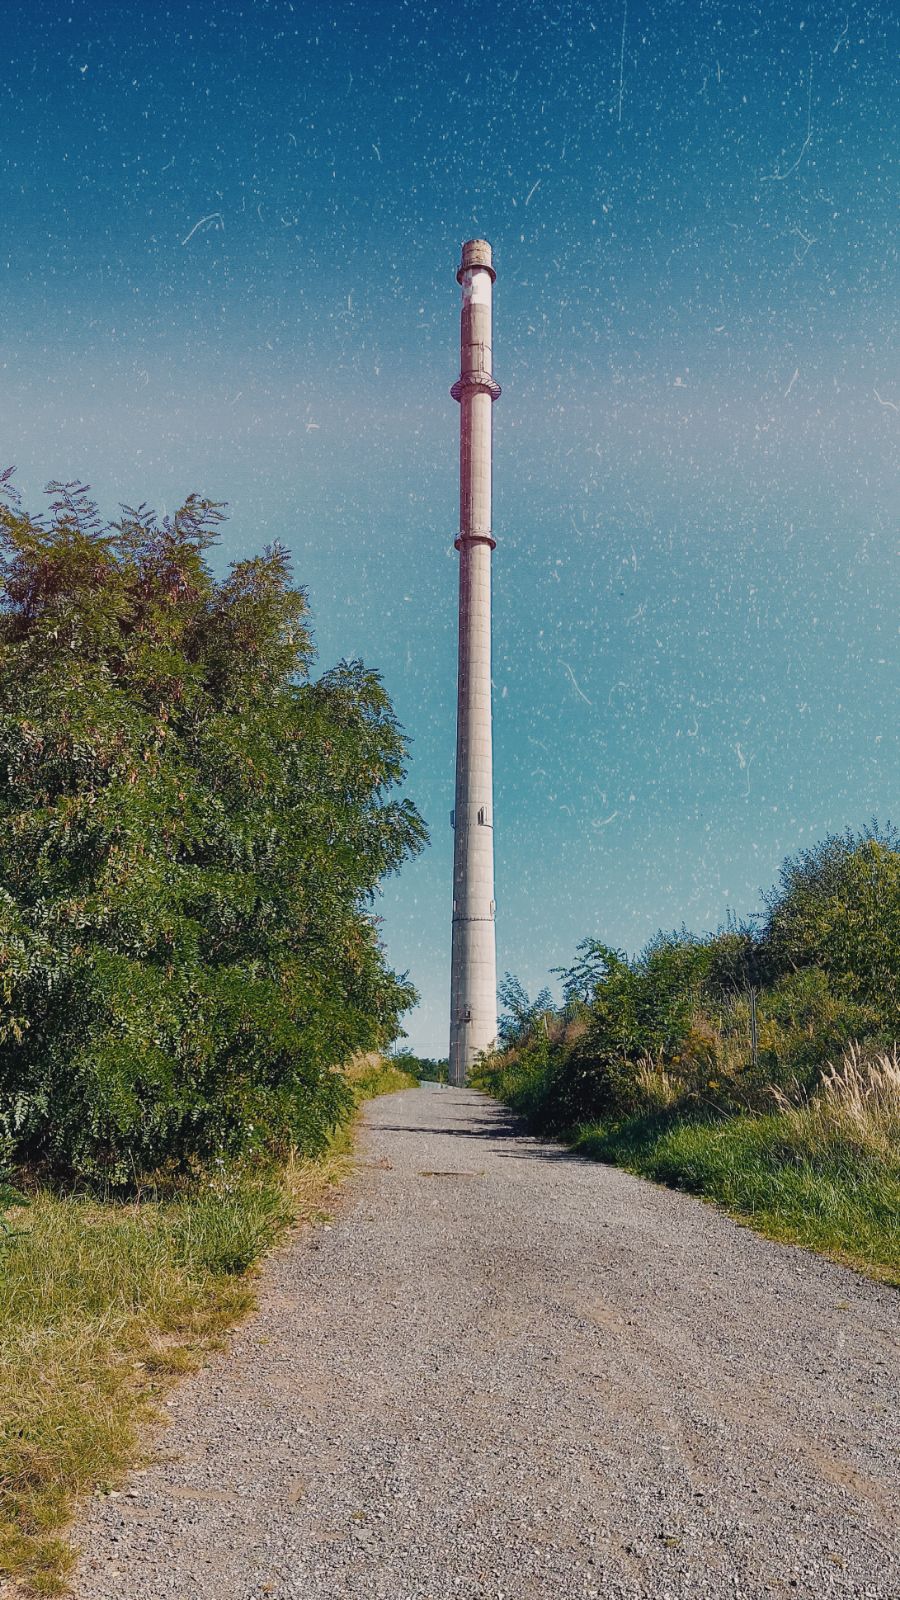 Chimney of some industrial facility behind the green, at the end of a way paved with small stones.